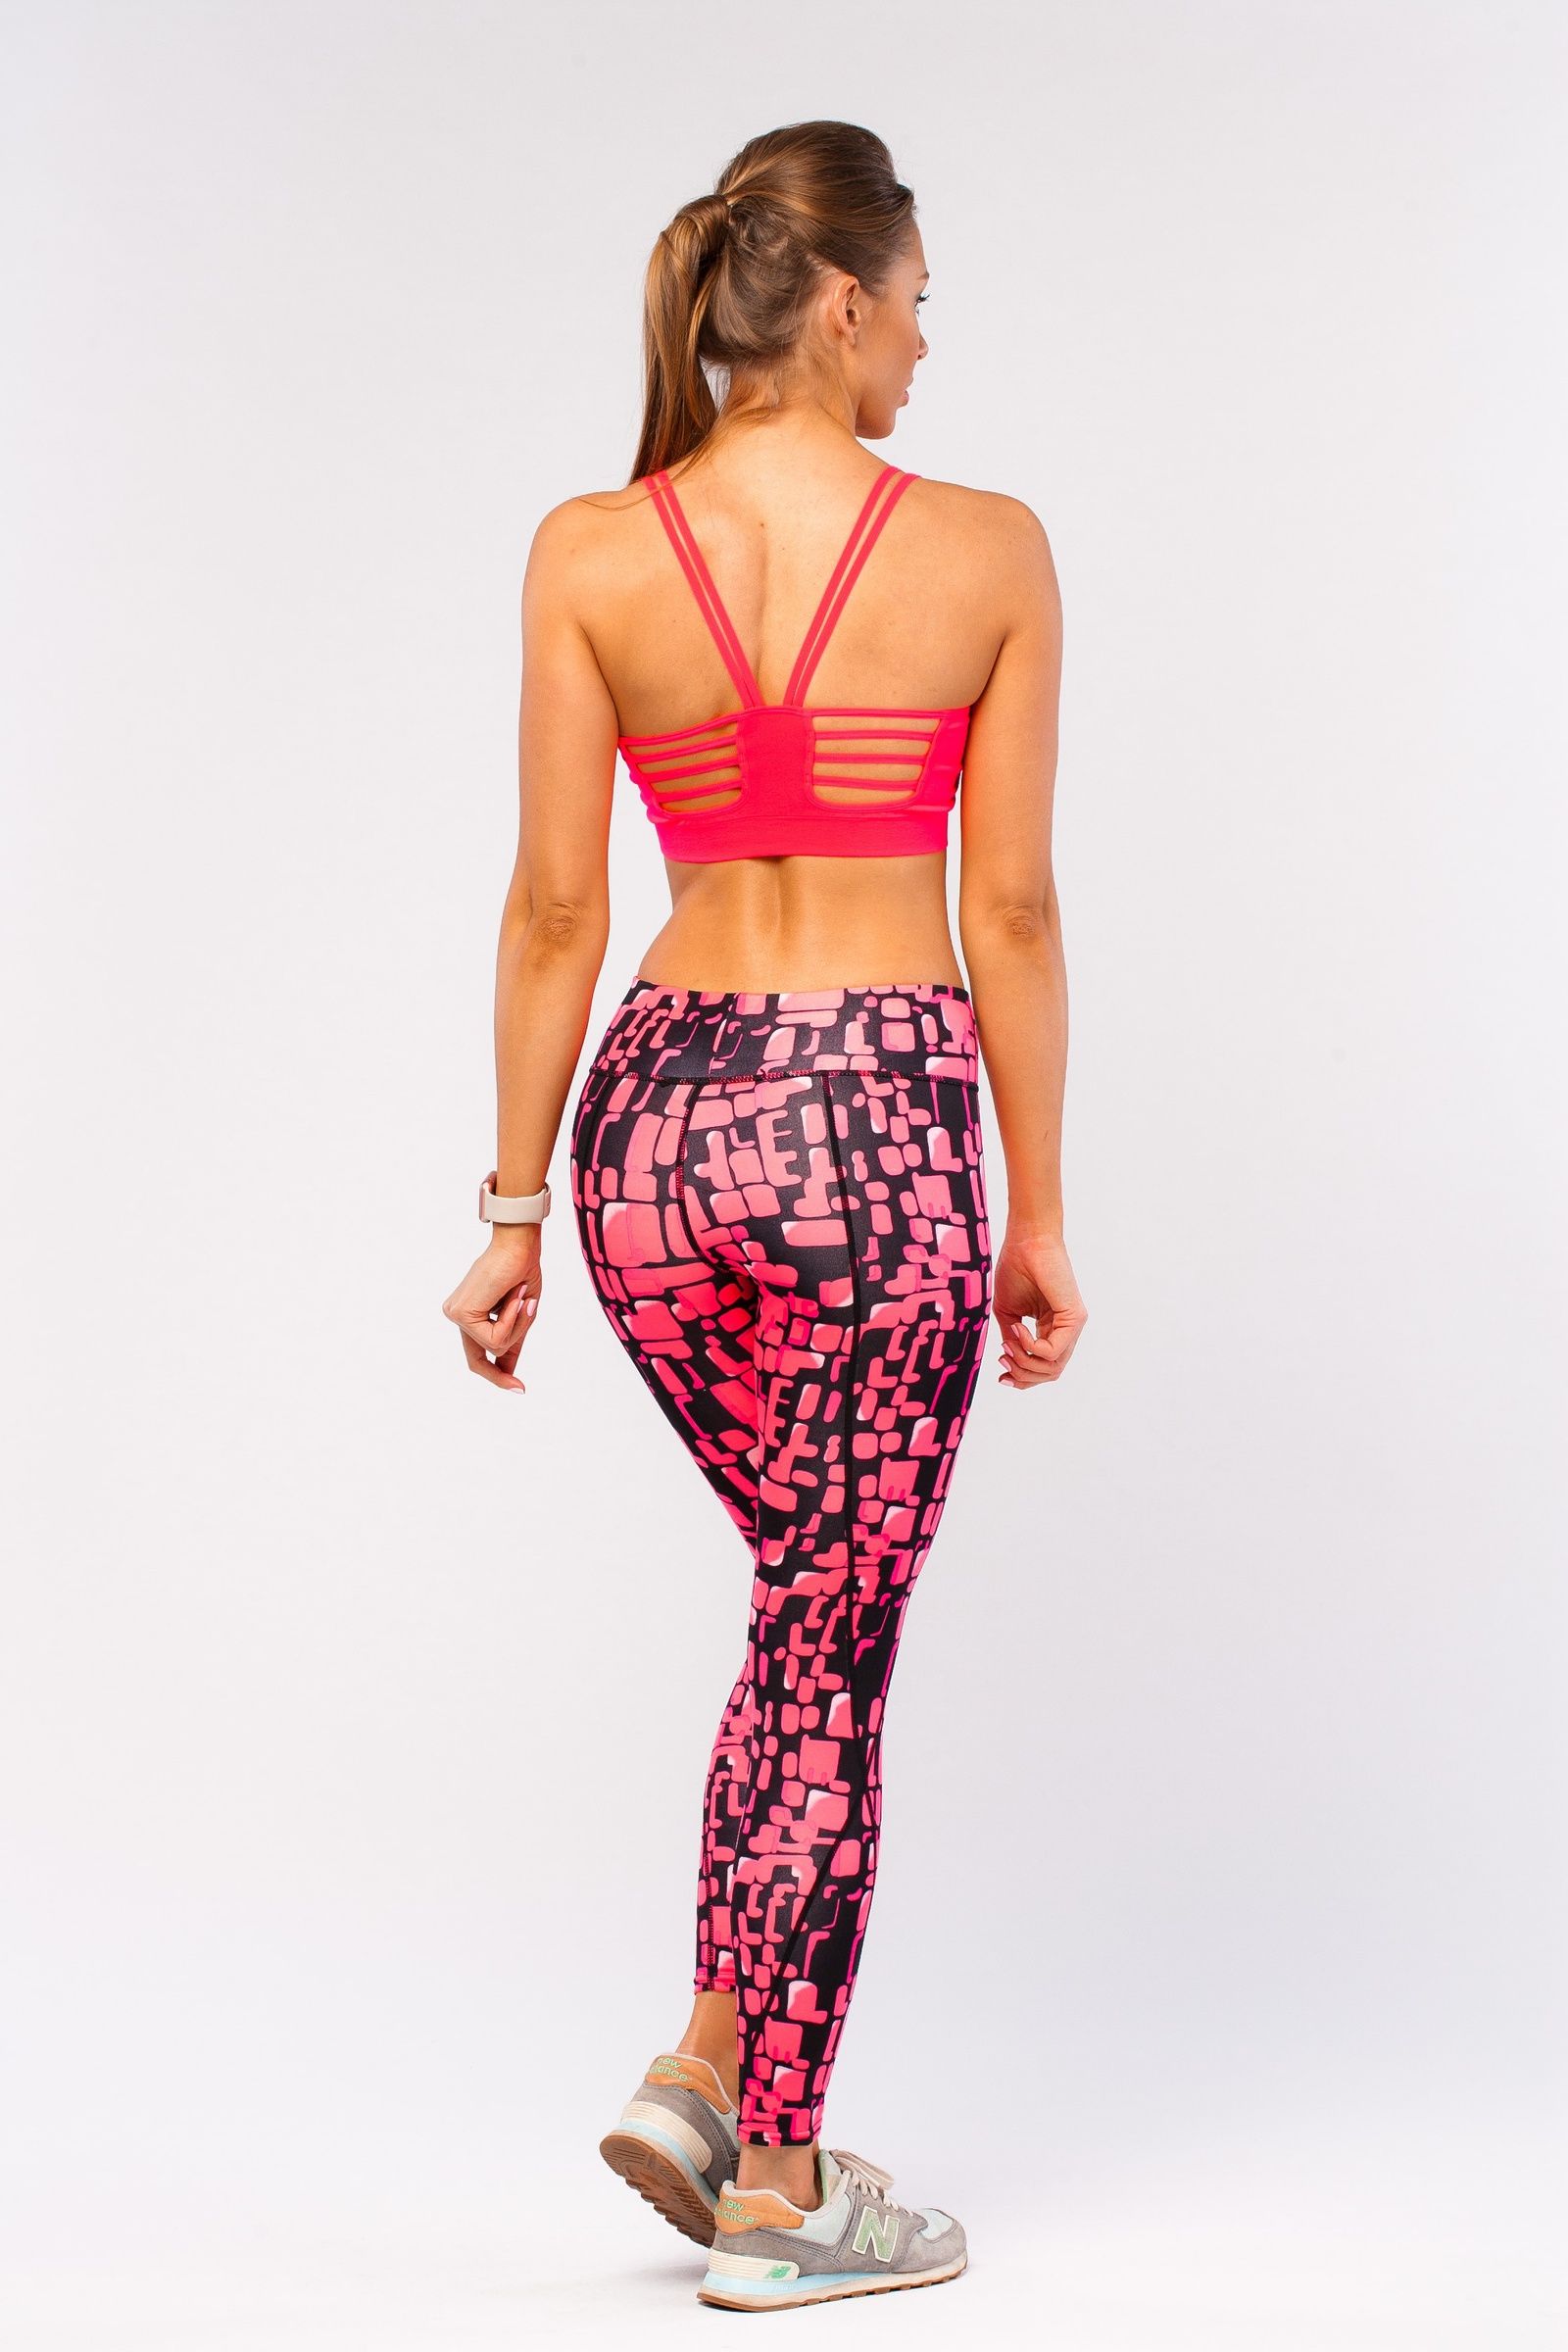   Pro-fit 31742 DIVA CORAL (S) , 42 